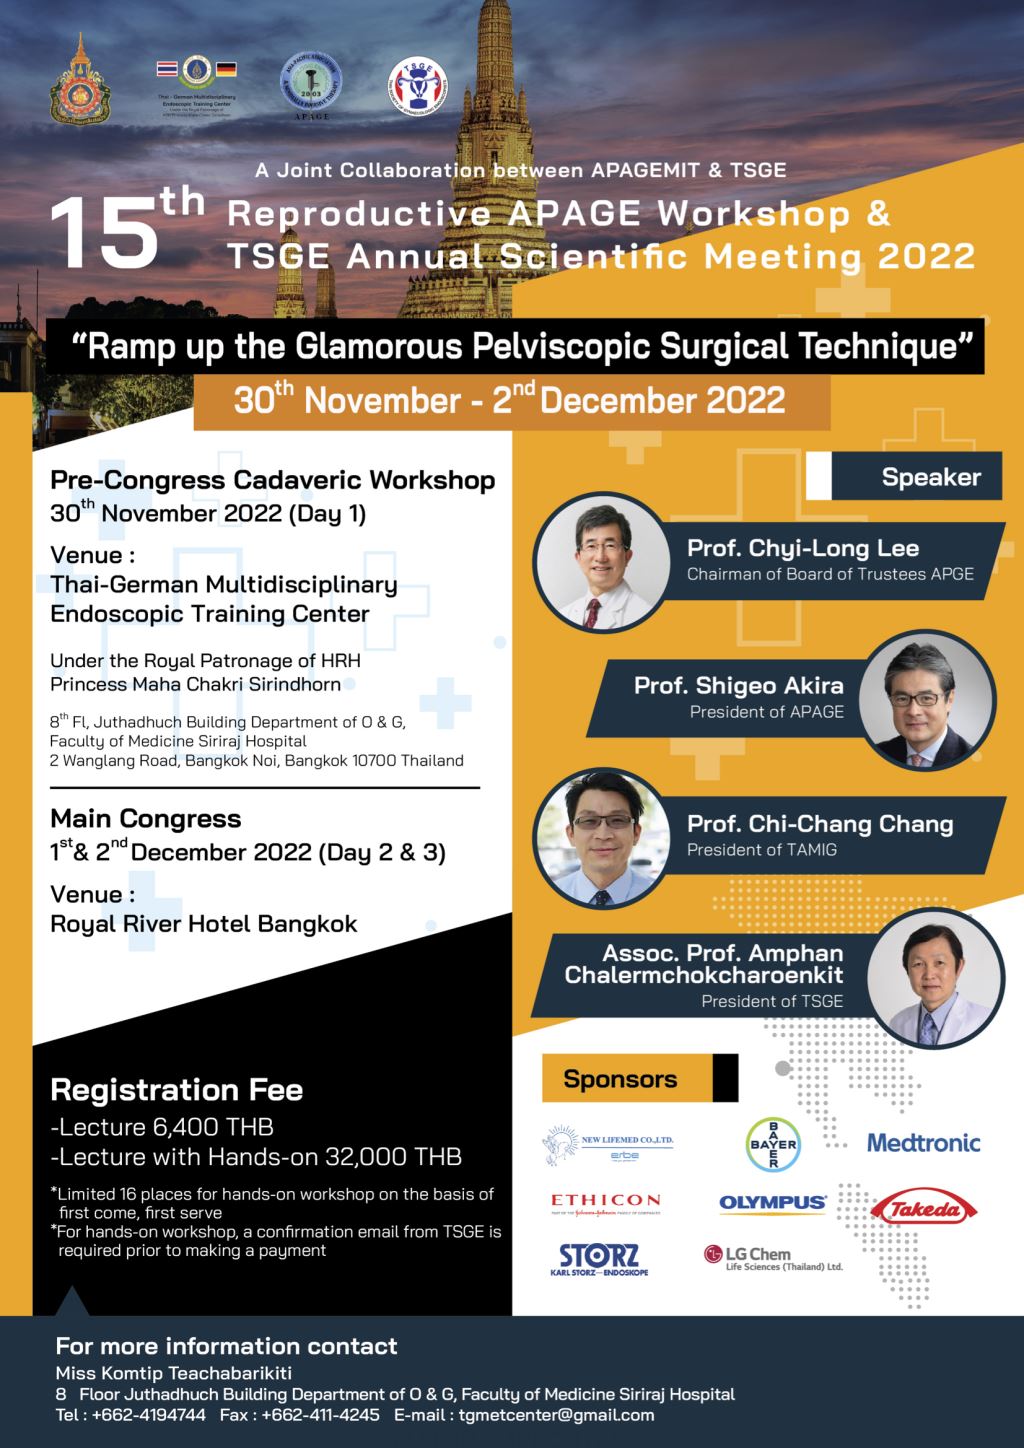 15th Reproductive APAGE and TSGE Annual Scientific Meeting 2022